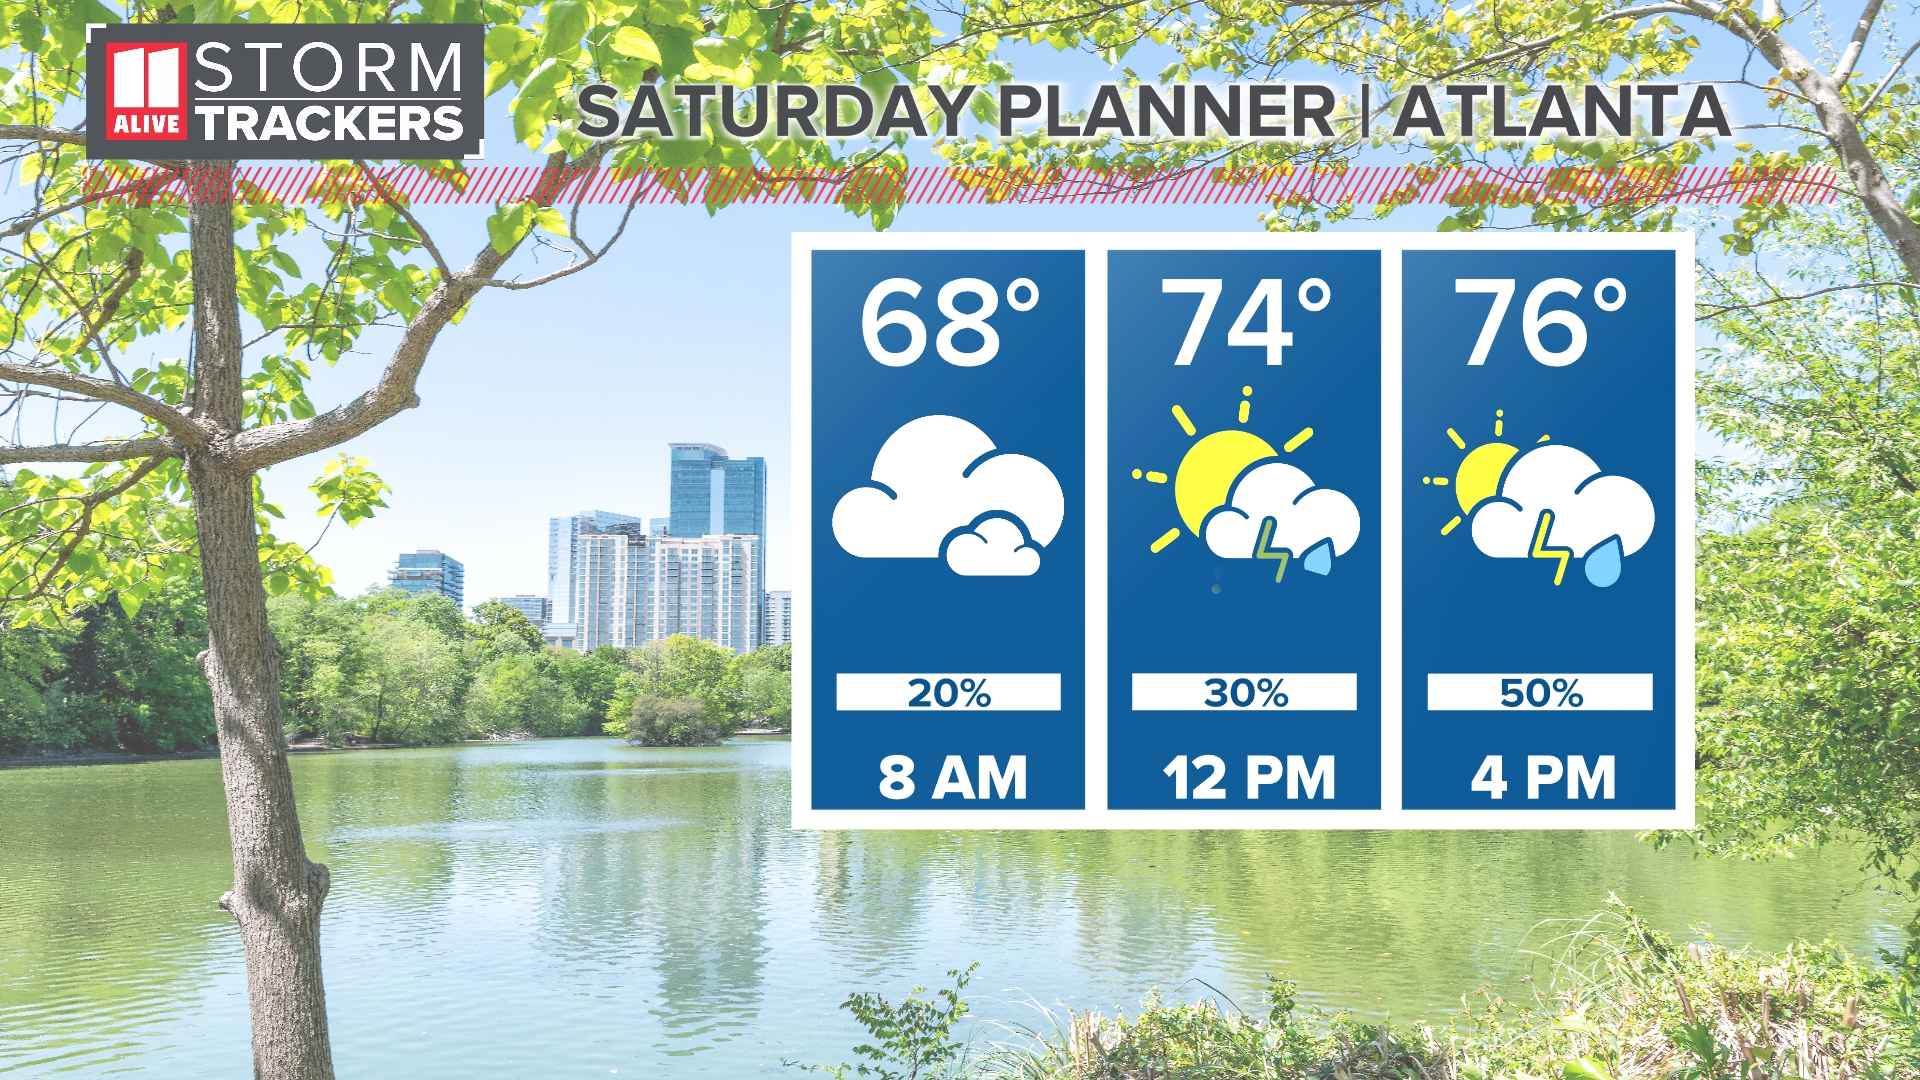 Scattered showers and storms are expected for Saturday afternoon with just a few isolated showers on Sunday.